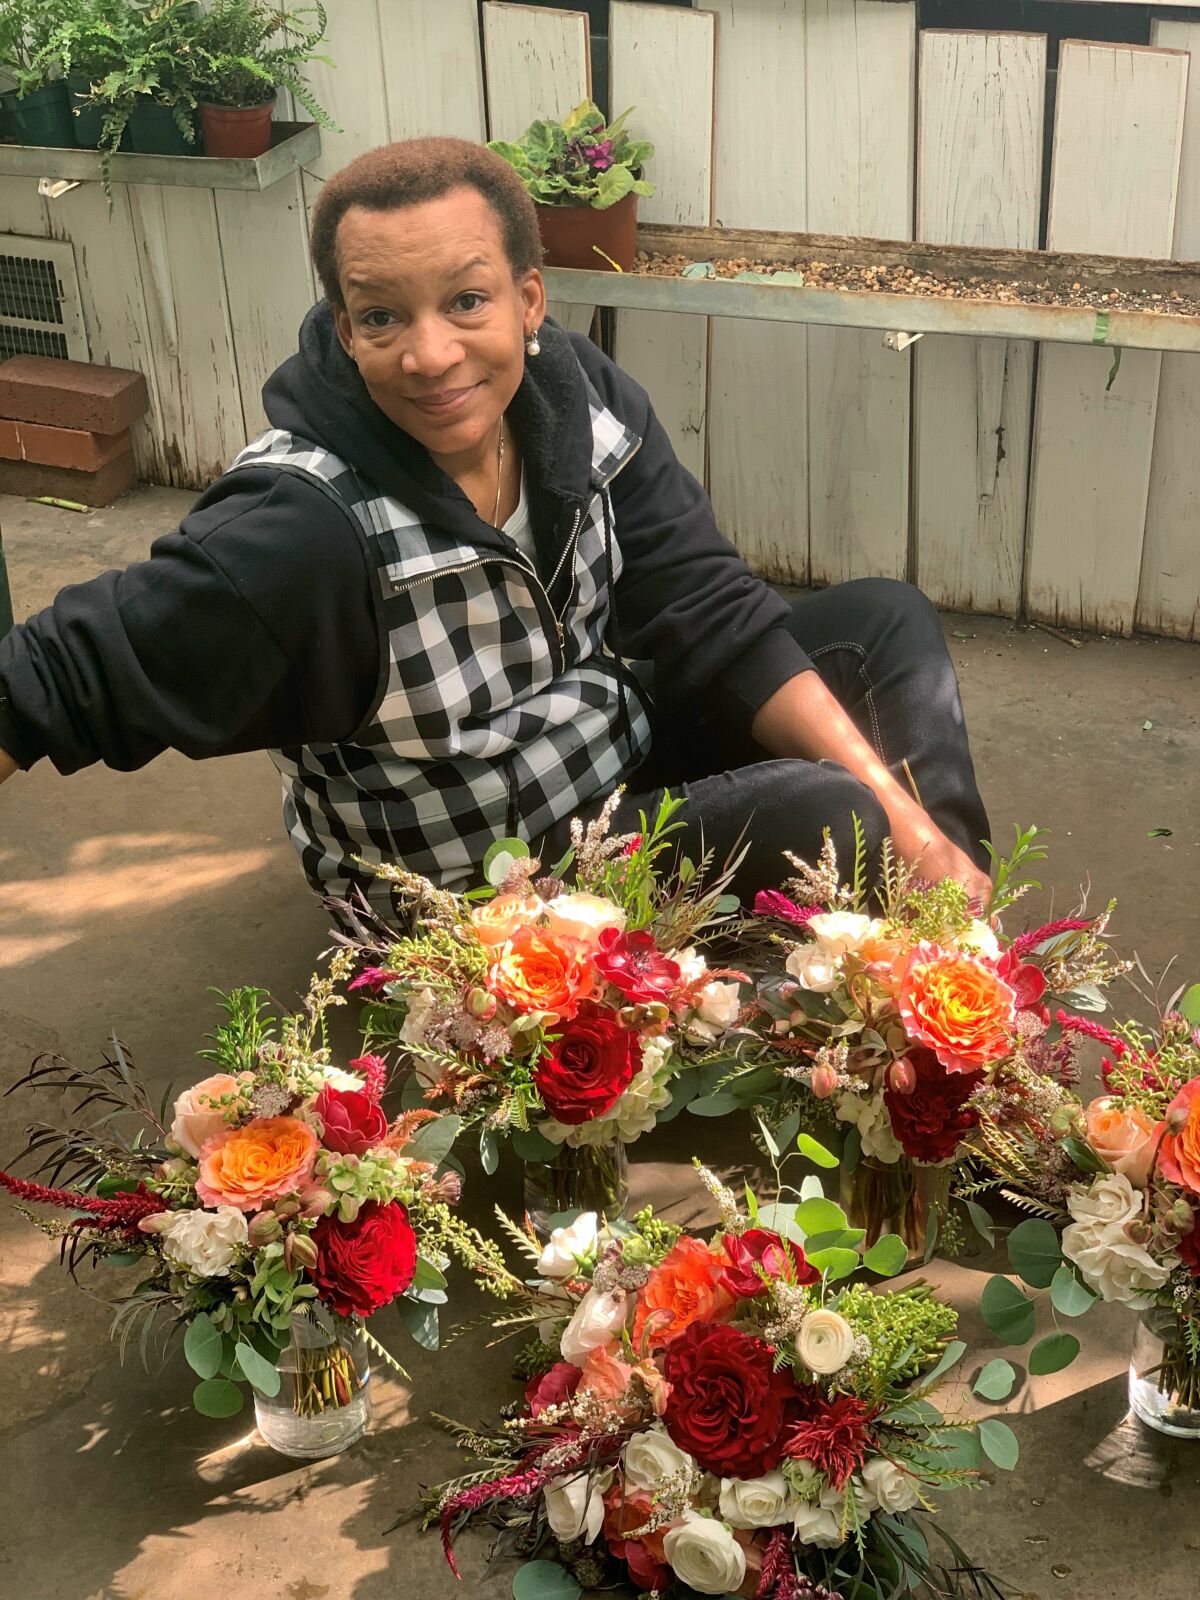 In this Oct. 12, 2019, photo provided by Angie Morton, Lisa Taylor poses with a flower arrangement taken at Rachel’s Flowers in Memphis, Tenn. An emergency management official in Shelby County, Tenn., said Taylor was found dead Saturday, Dec. 11, 2021, after a tree uprooted in a violent storm fell through the roof of her Memphis home, landing on Taylor as she slept. Co-workers said she recently left her job as a florist of 14 years for a government job at the Memphis airport. (Angie Morton via AP)